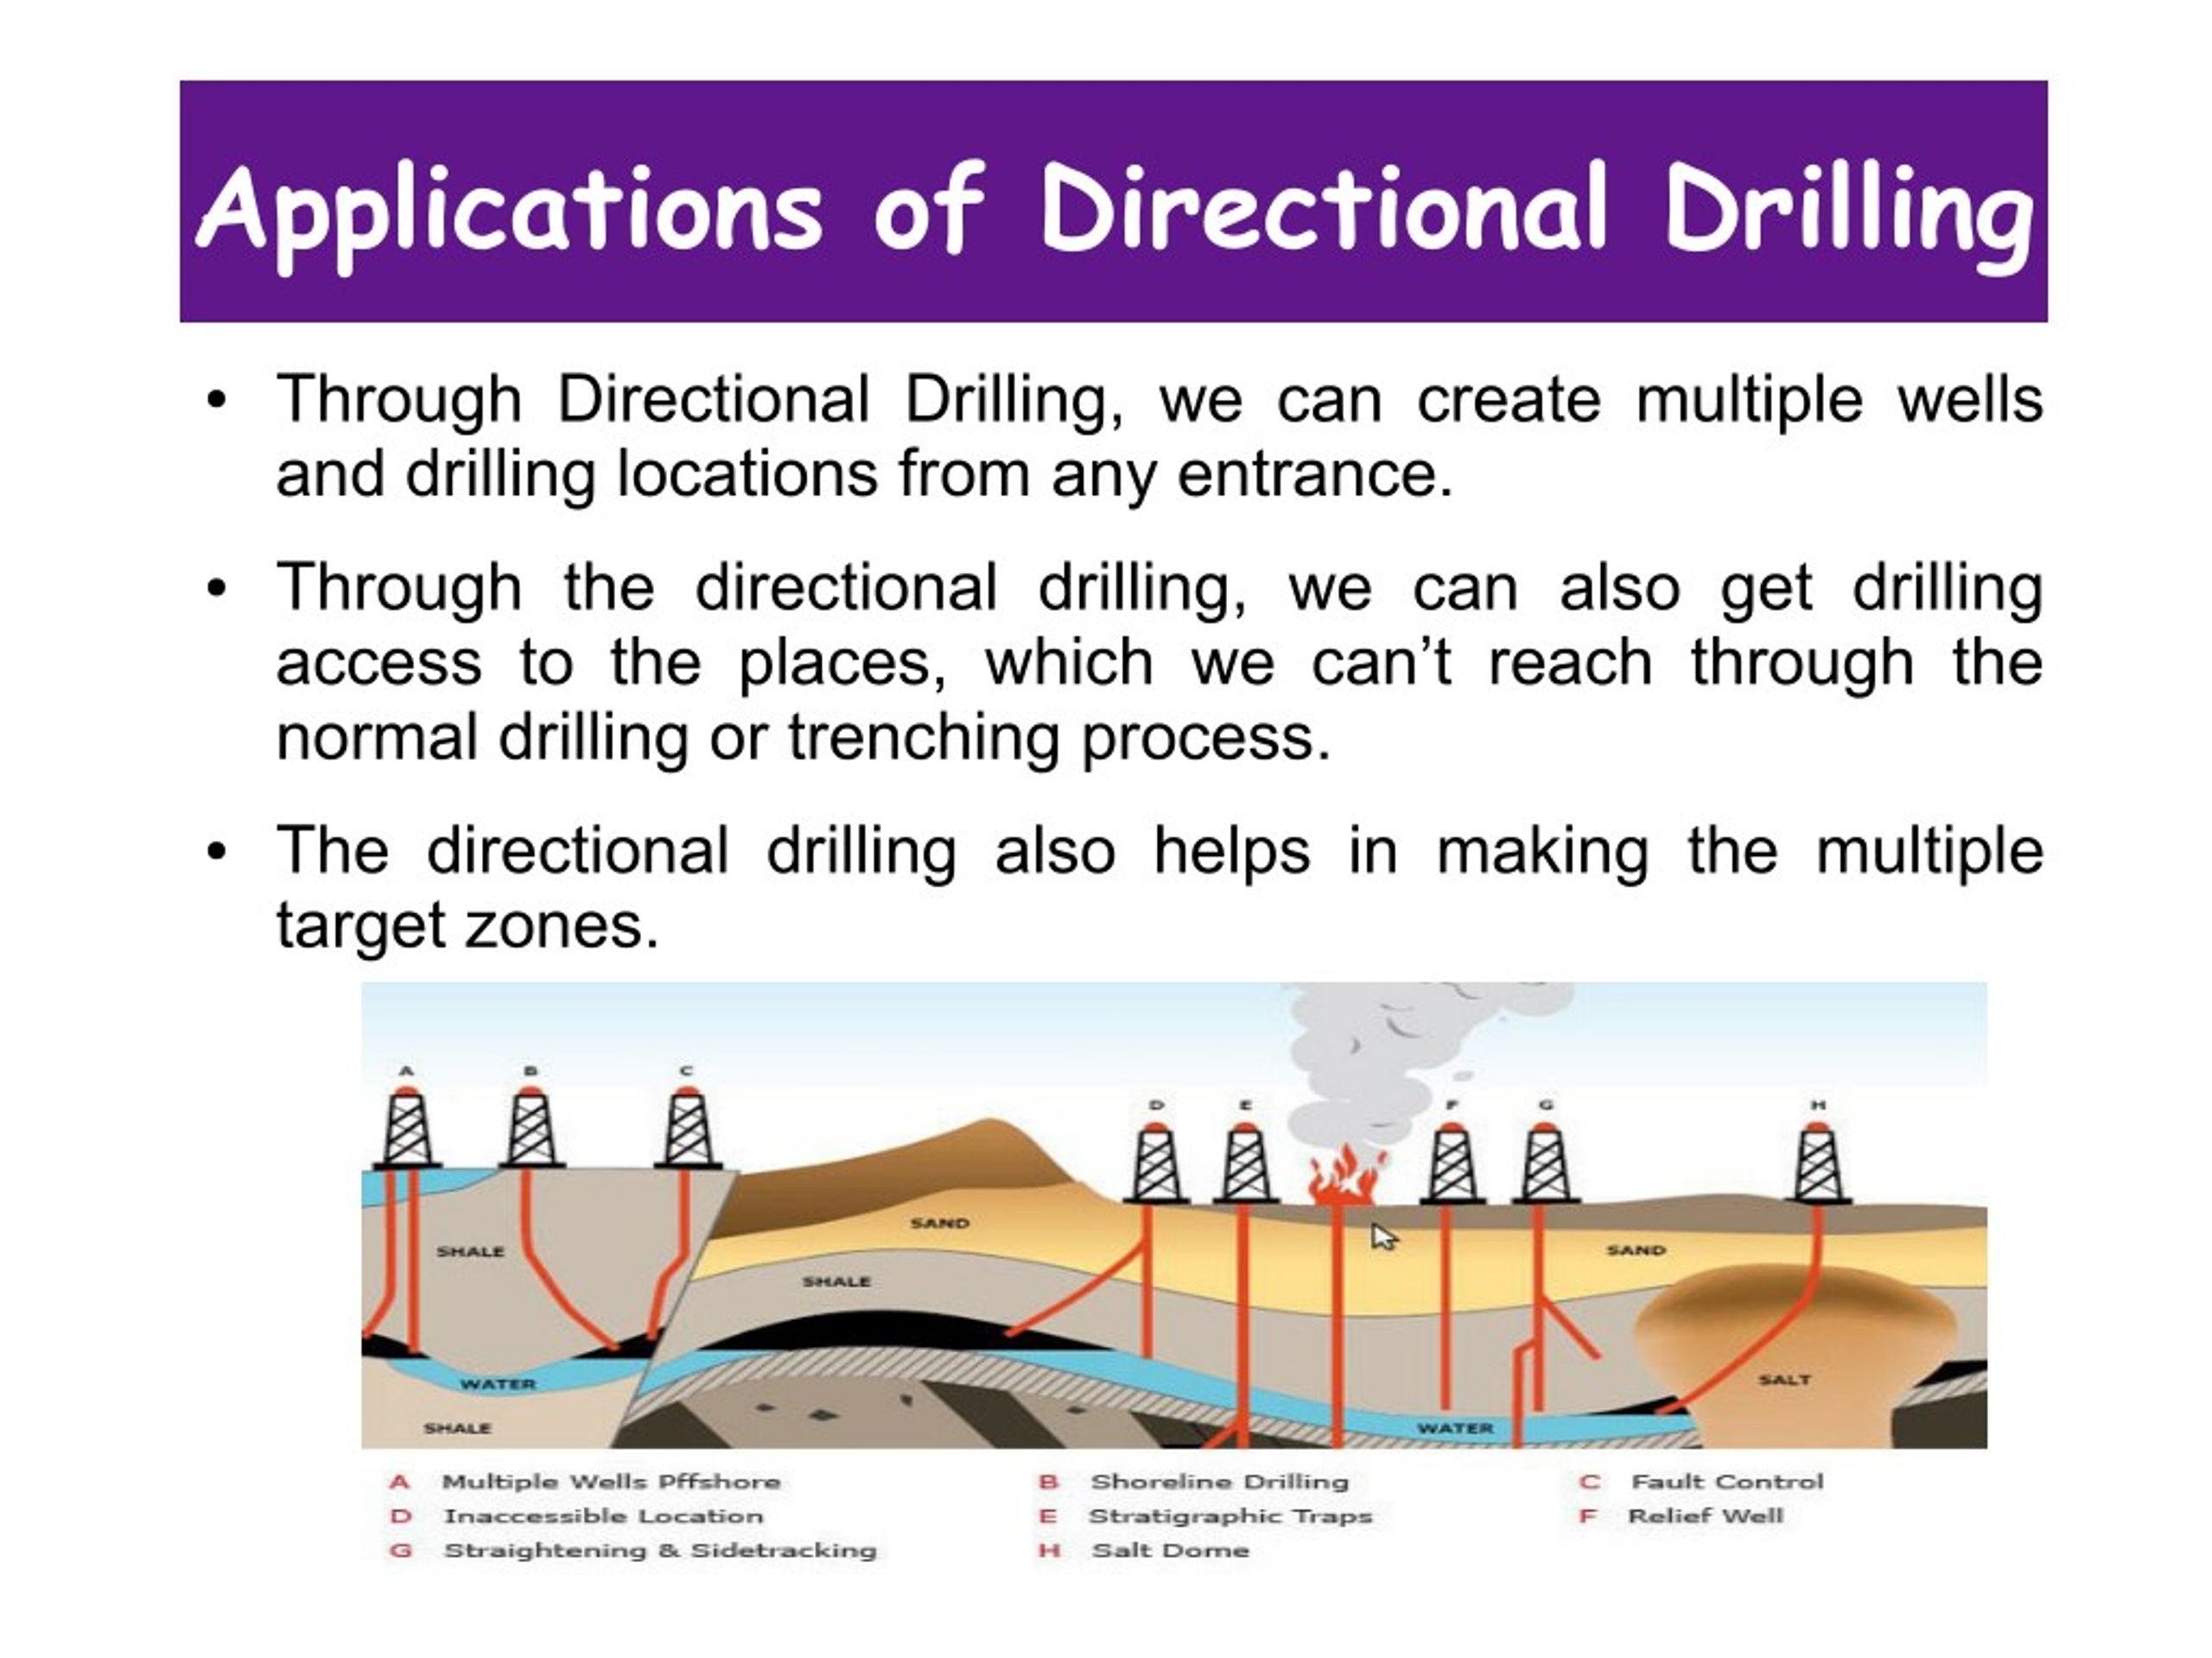 directional drilling definition